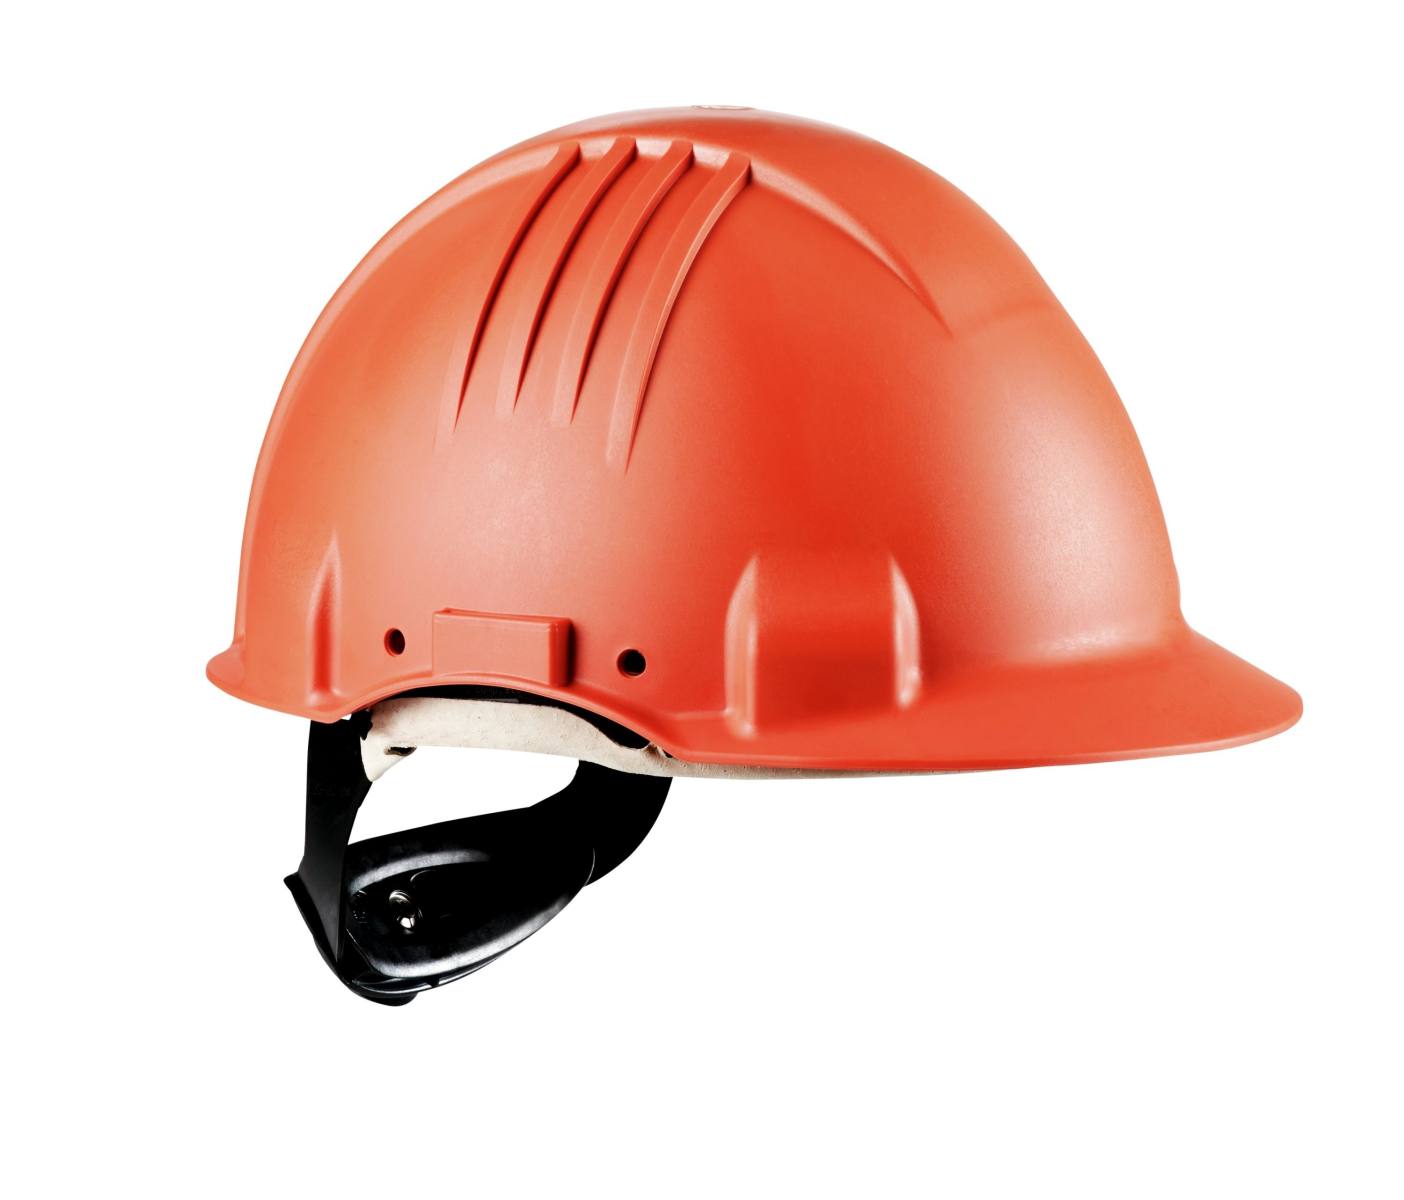 3M High-temperature safety helmet, ratchet fastening, non-ventilated, dielectric 1000 V, leather sweatband, orange, G3501M-OR